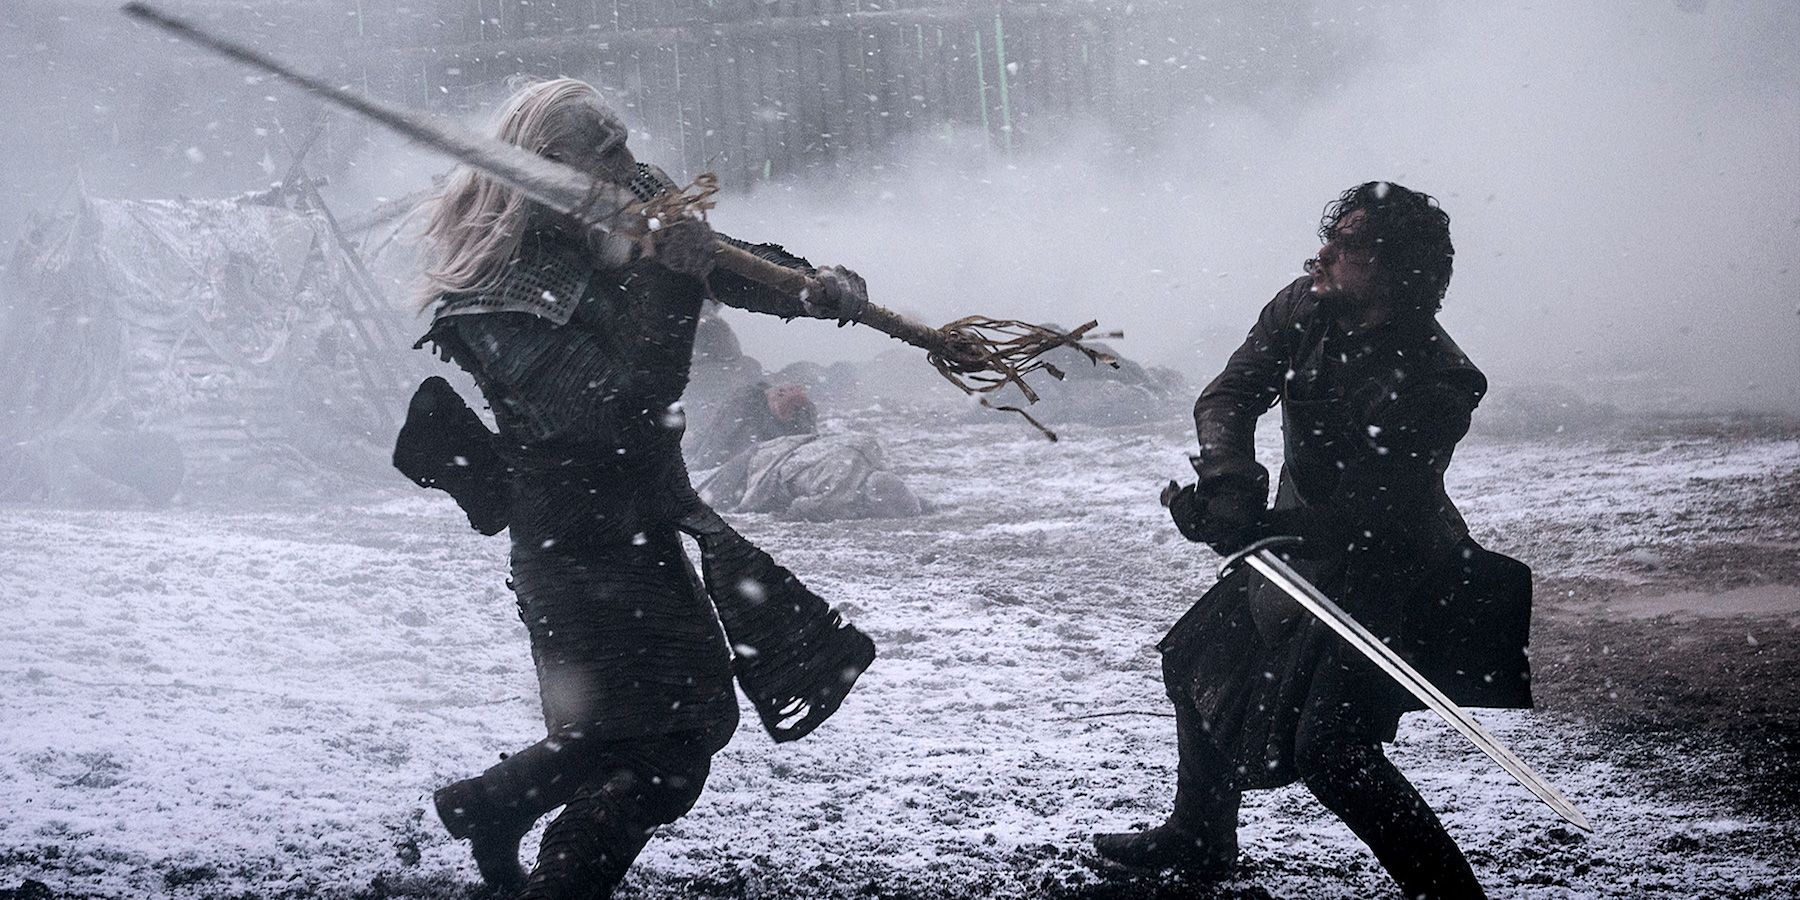 Jon Snow Fights White Walker in Hardhome Episode of Game of Thrones